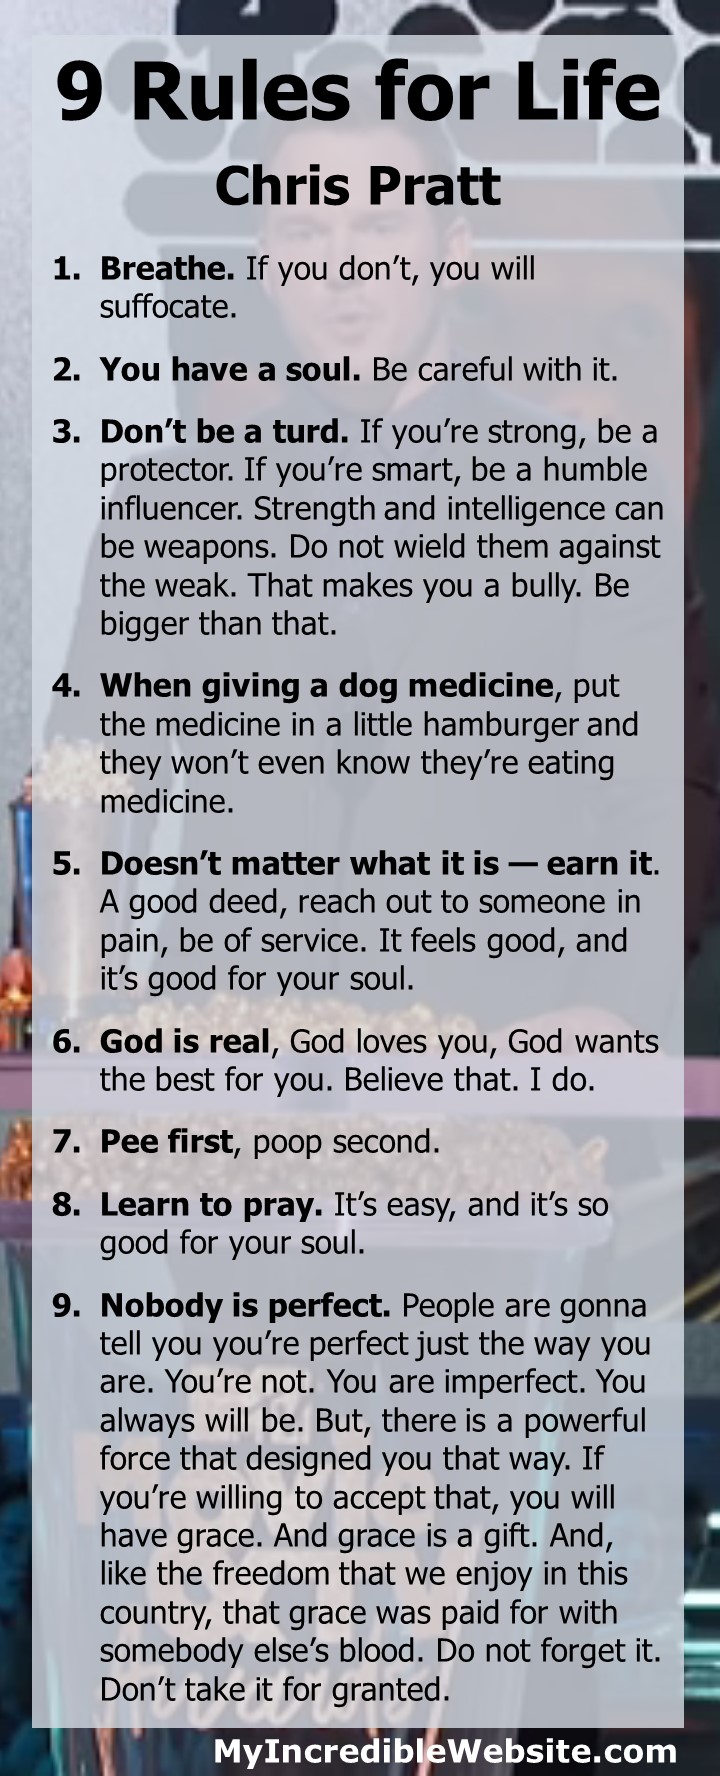 9 Rules for Life from Chris Pratt - These 9 Rules for Life from Chris Pratt were shared by Chris during his acceptance speech for the Generation Award at the 2018 MTV Movie & TV Awards.